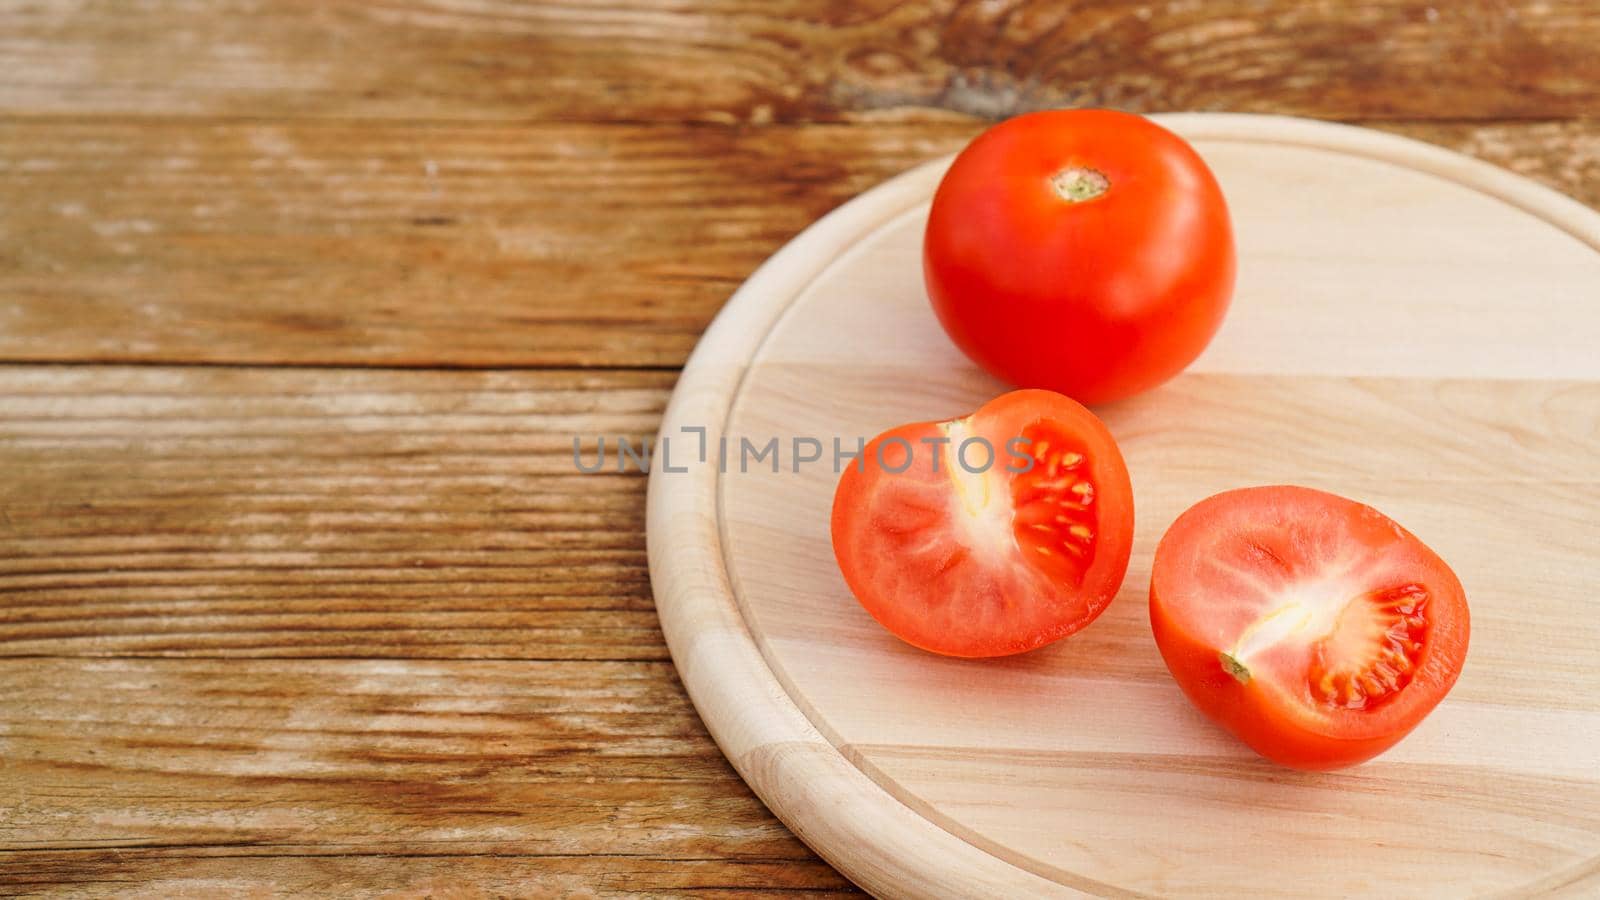 Whole and cut tomato on a wooden board for slicing. Rustic style and wood by natali_brill